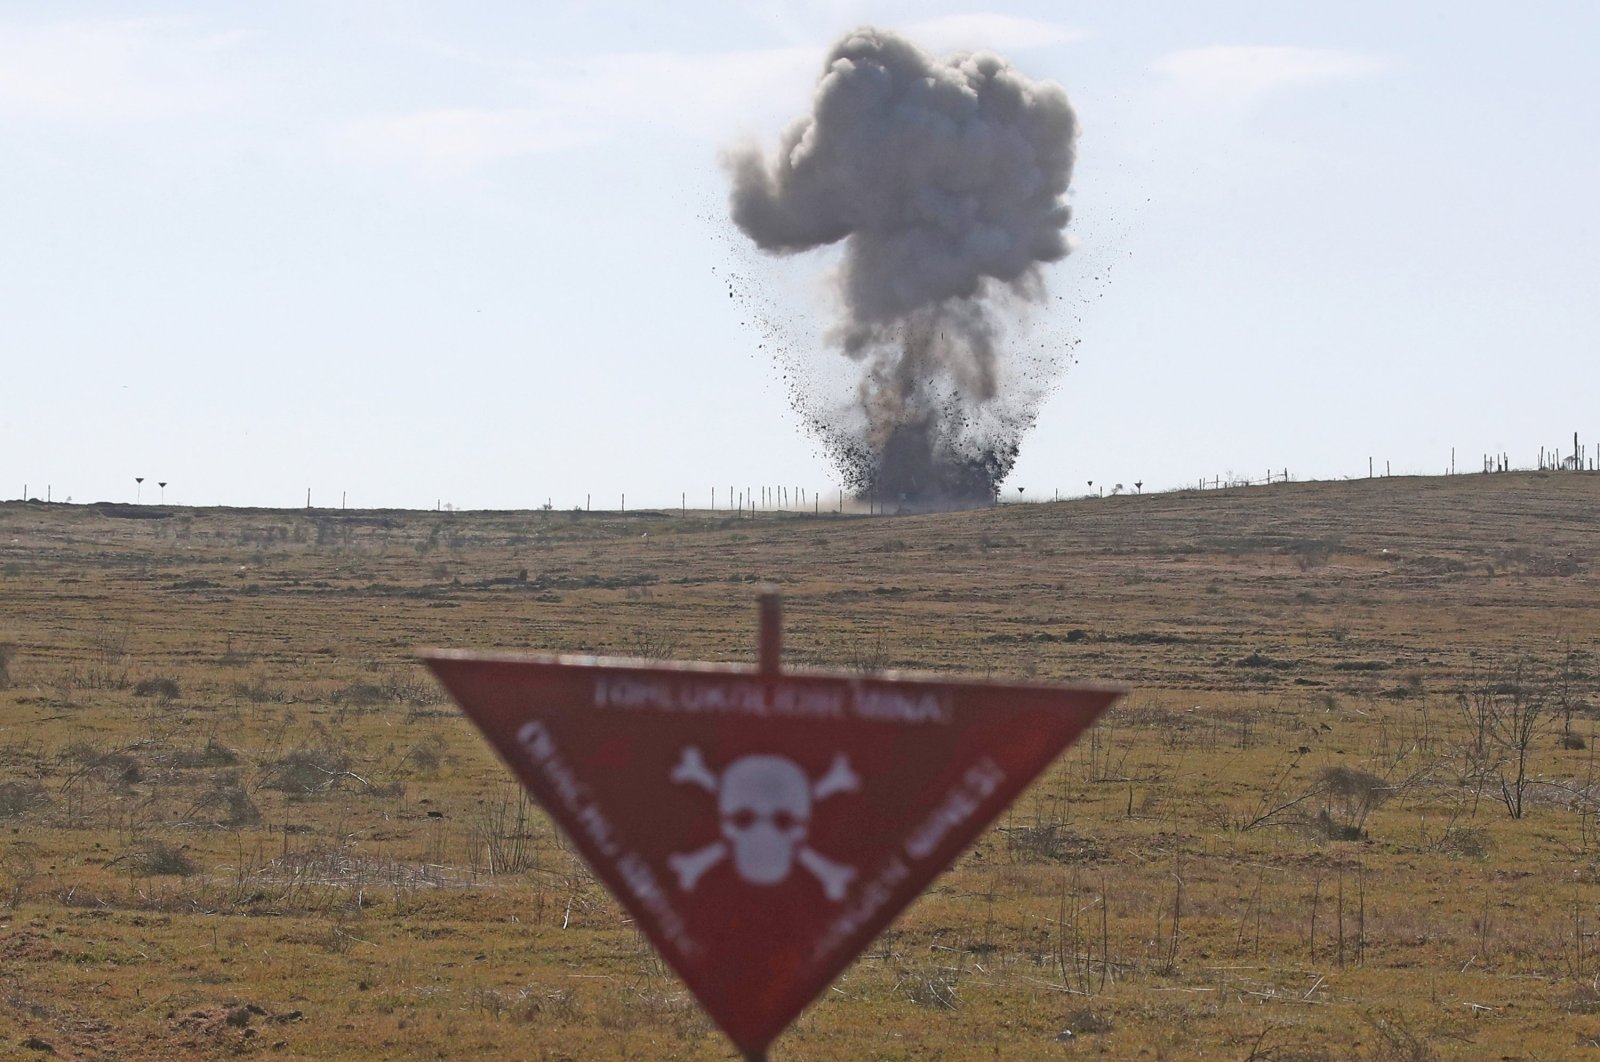 Unexploded ammunition is detonated during a demo mine-clearing operation by the Azerbaijan National Agency for Mine Action (ANAMA) to further operations to clear mines previously planted by Armenian forces, Fuzuli, Azerbaijan, Feb. 27, 2021. (Photo by Getty Images)